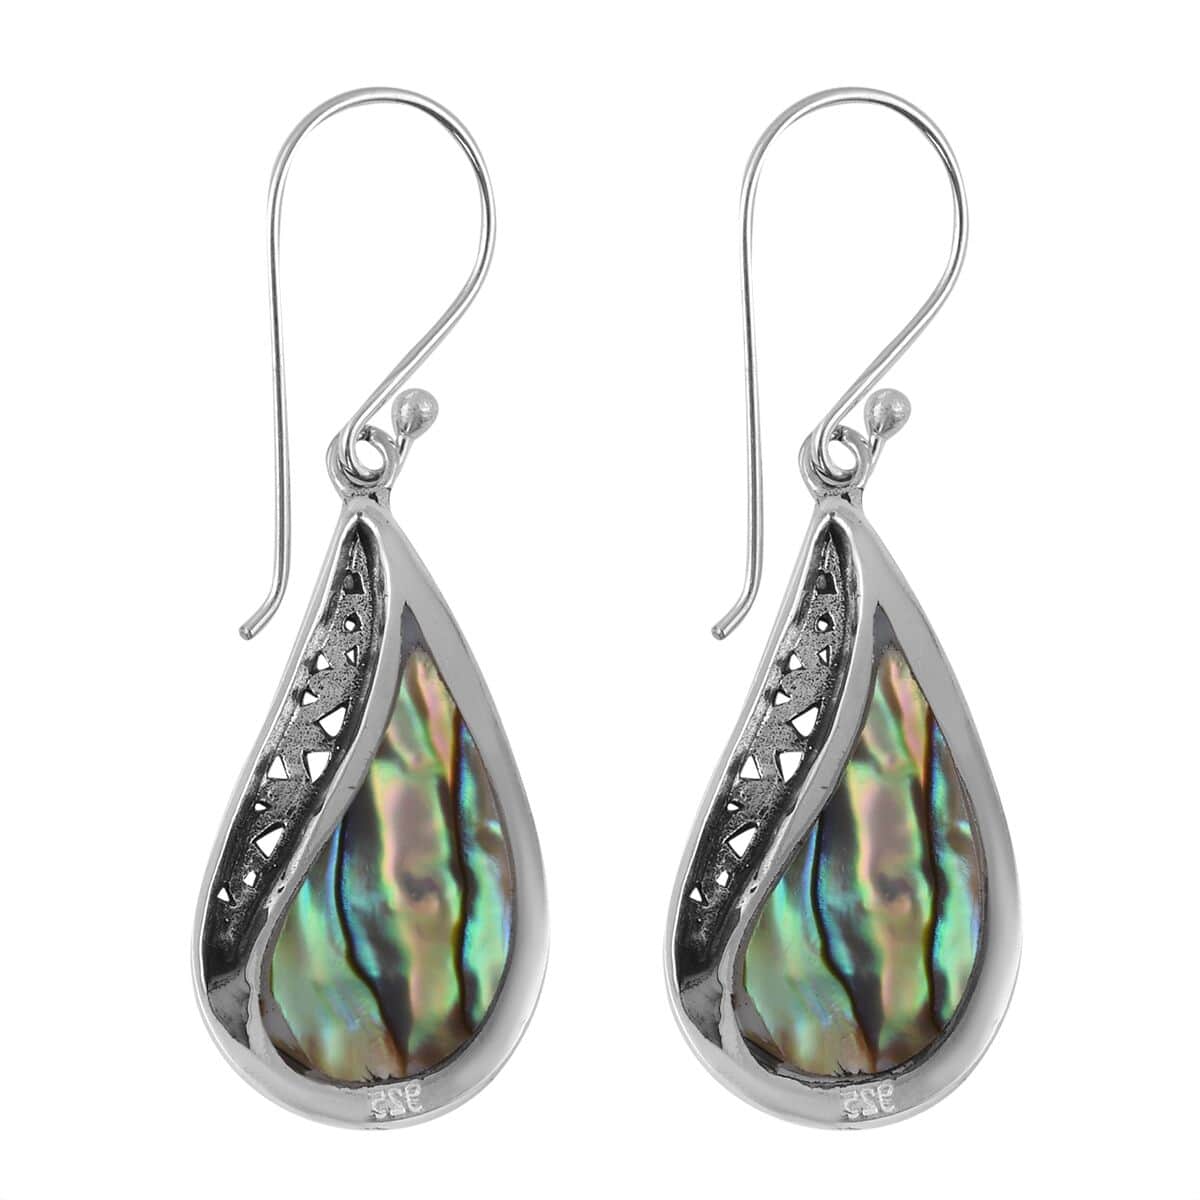 Abalone Shell Drop Earrings For Women in Sterling Silver, Beach Fashion Jewelry image number 3